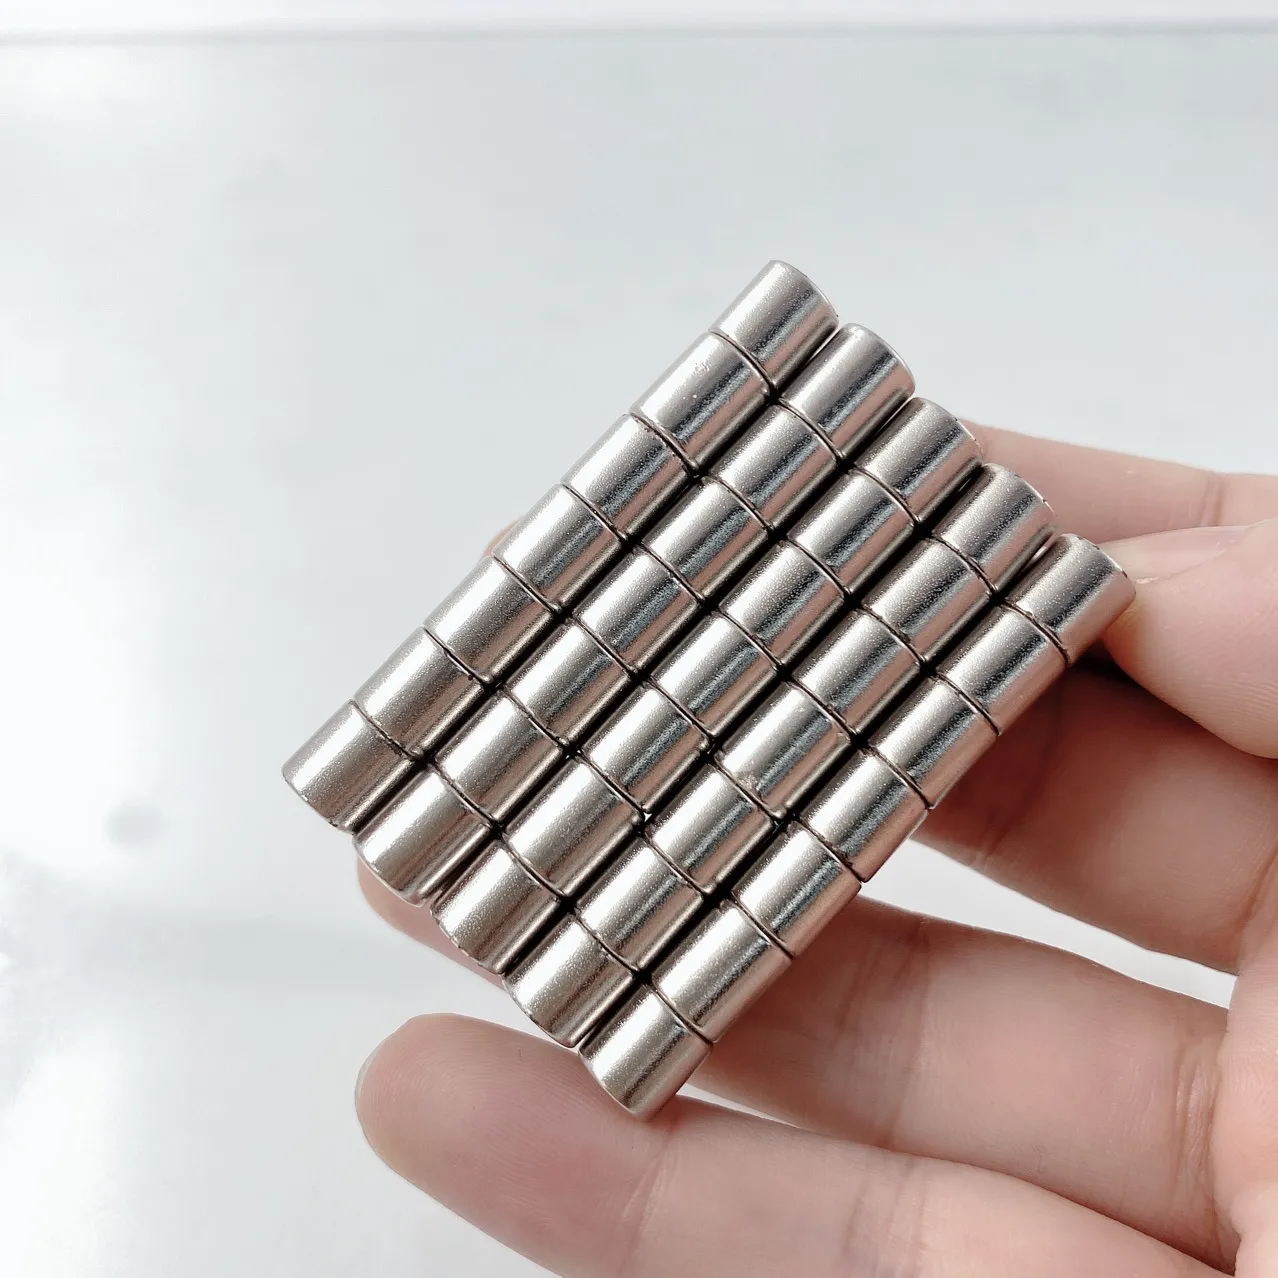 Wholesale Super Strong 2x2 Neodymium Small Strong Magnets Permanent N35  NdFeB Discs, Small Round Shape, 2mm X 2m From Mosobamboosell, $2.55